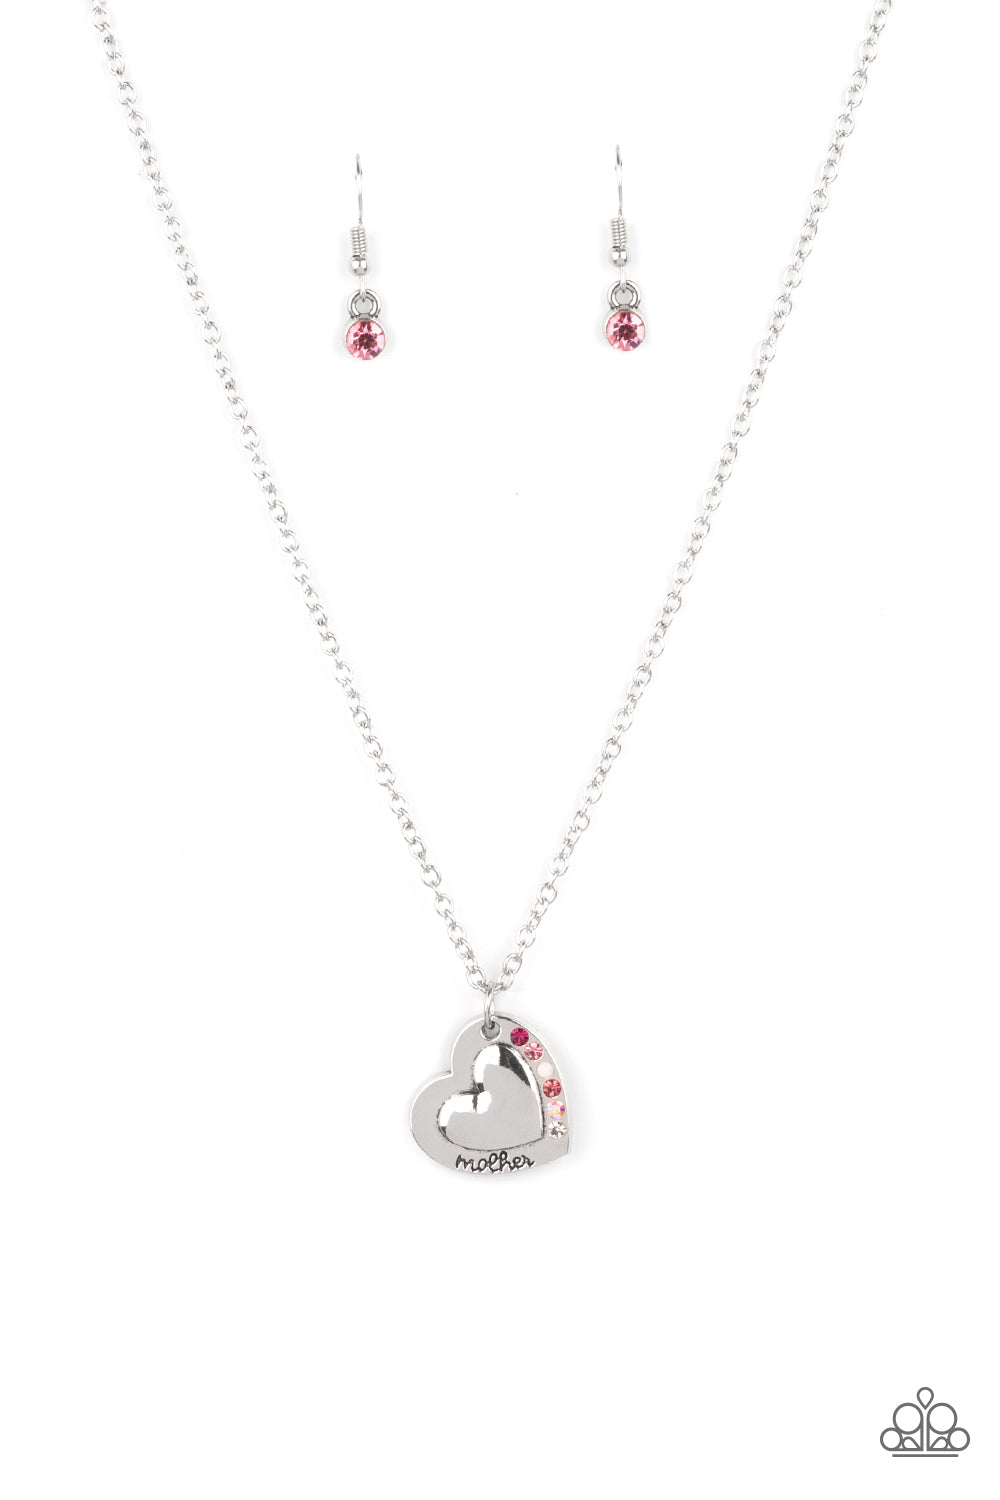 Happily Heartwarming - pink - Paparazzi necklace